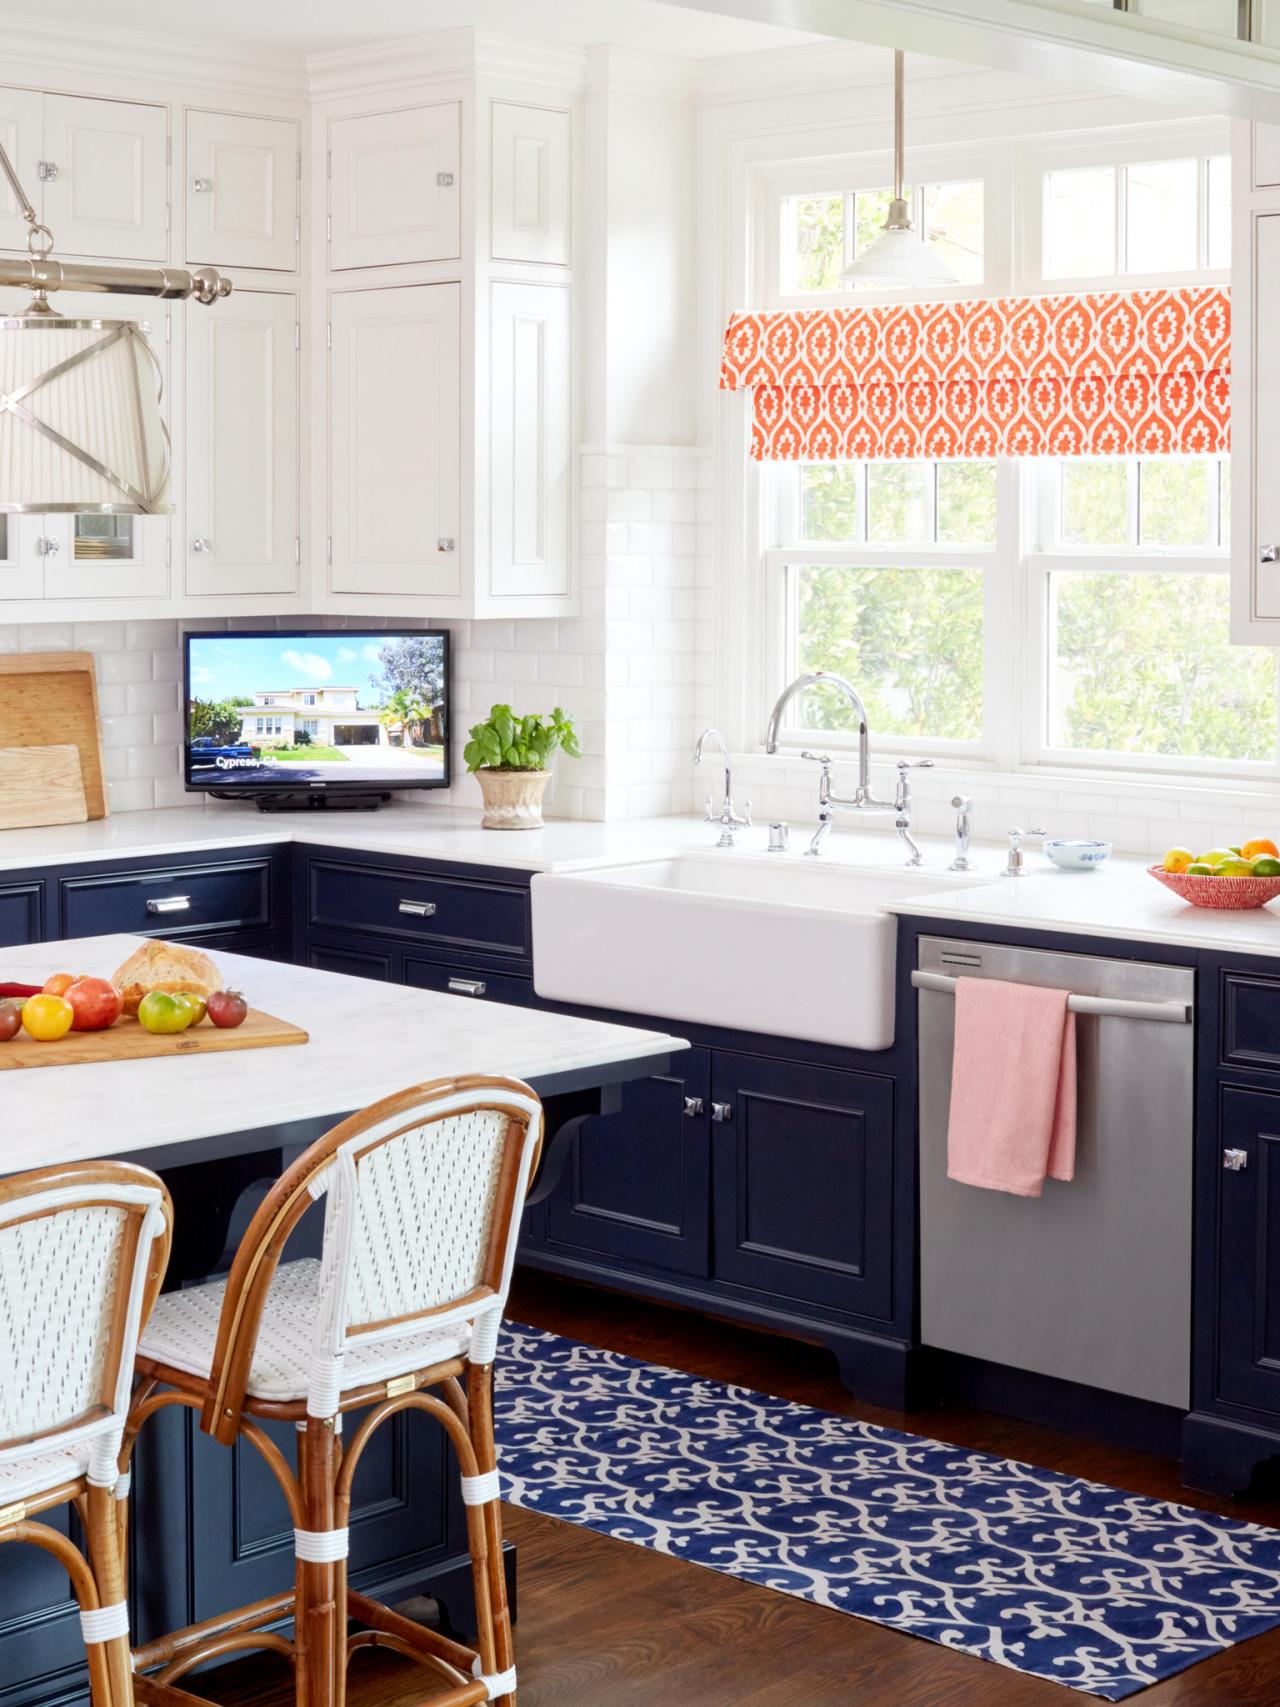 Decorating Ideas Inspired By A Colorful California Kitchen   HGTV